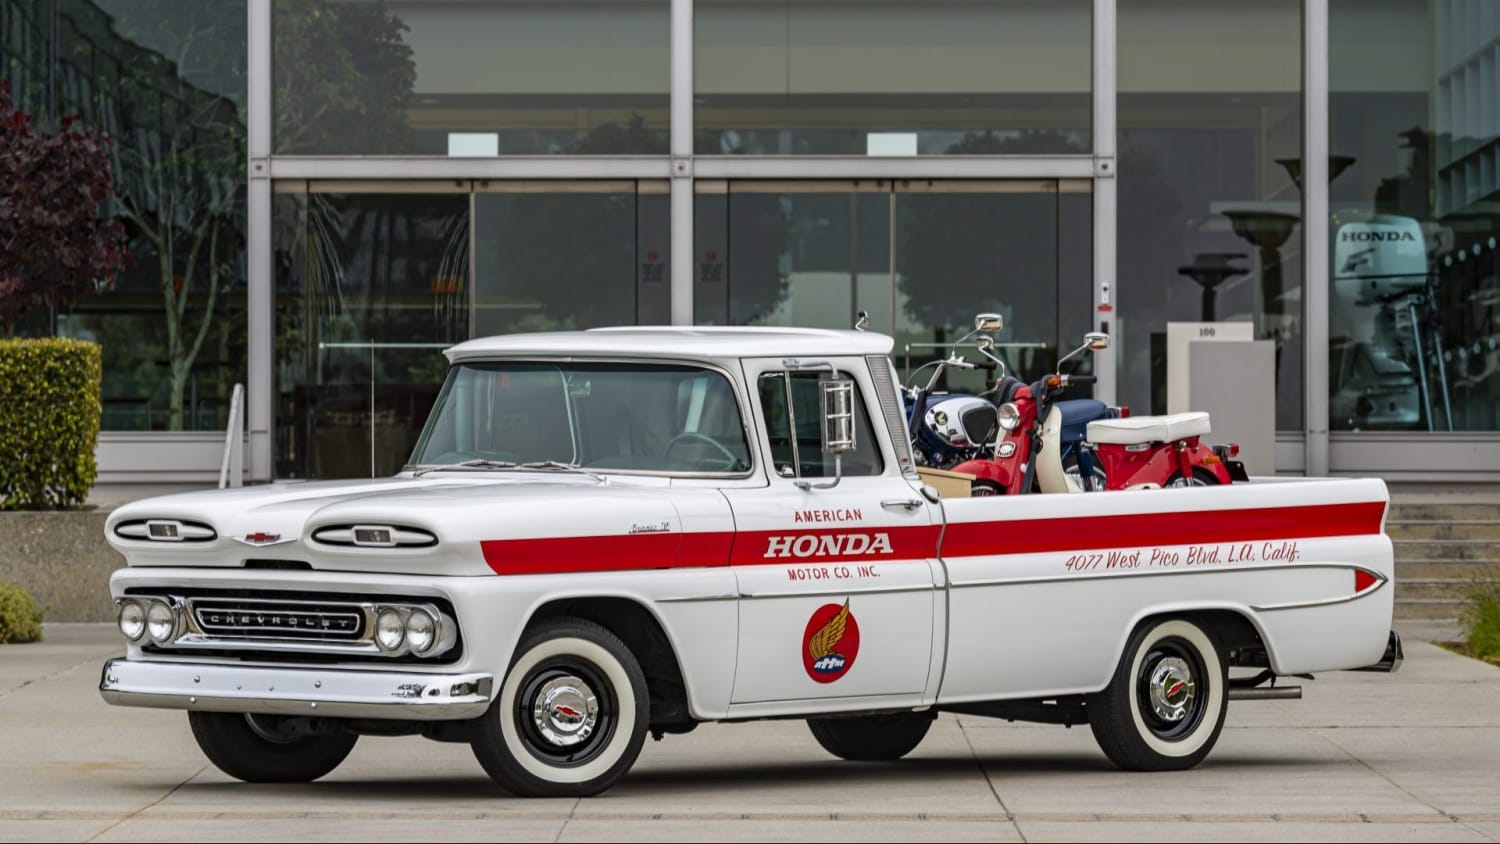 Honda Meticulously Restored This 1961 Chevy Apache 10 Pickup to Honor Its Past